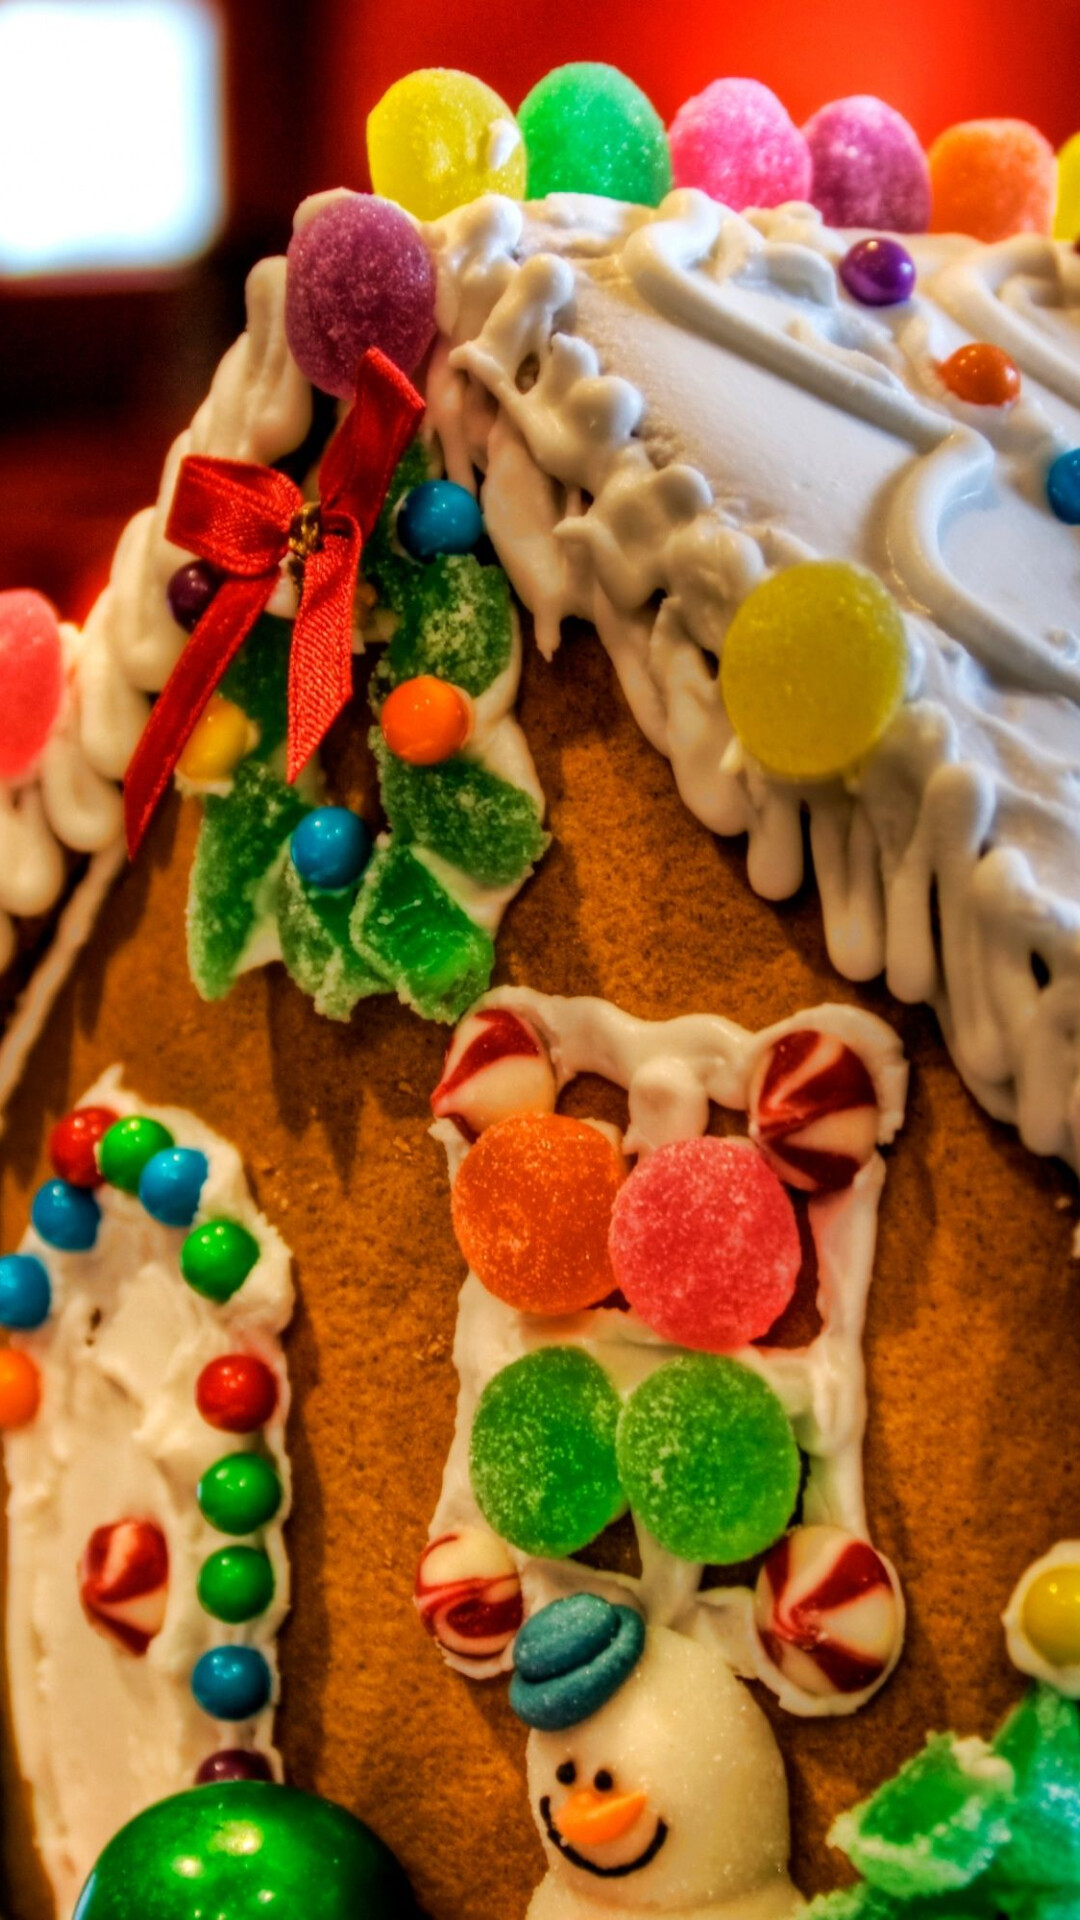 Gingerbread house inspiration, Festive designs, Holiday joy, Delicious and decorative, 1080x1920 Full HD Phone